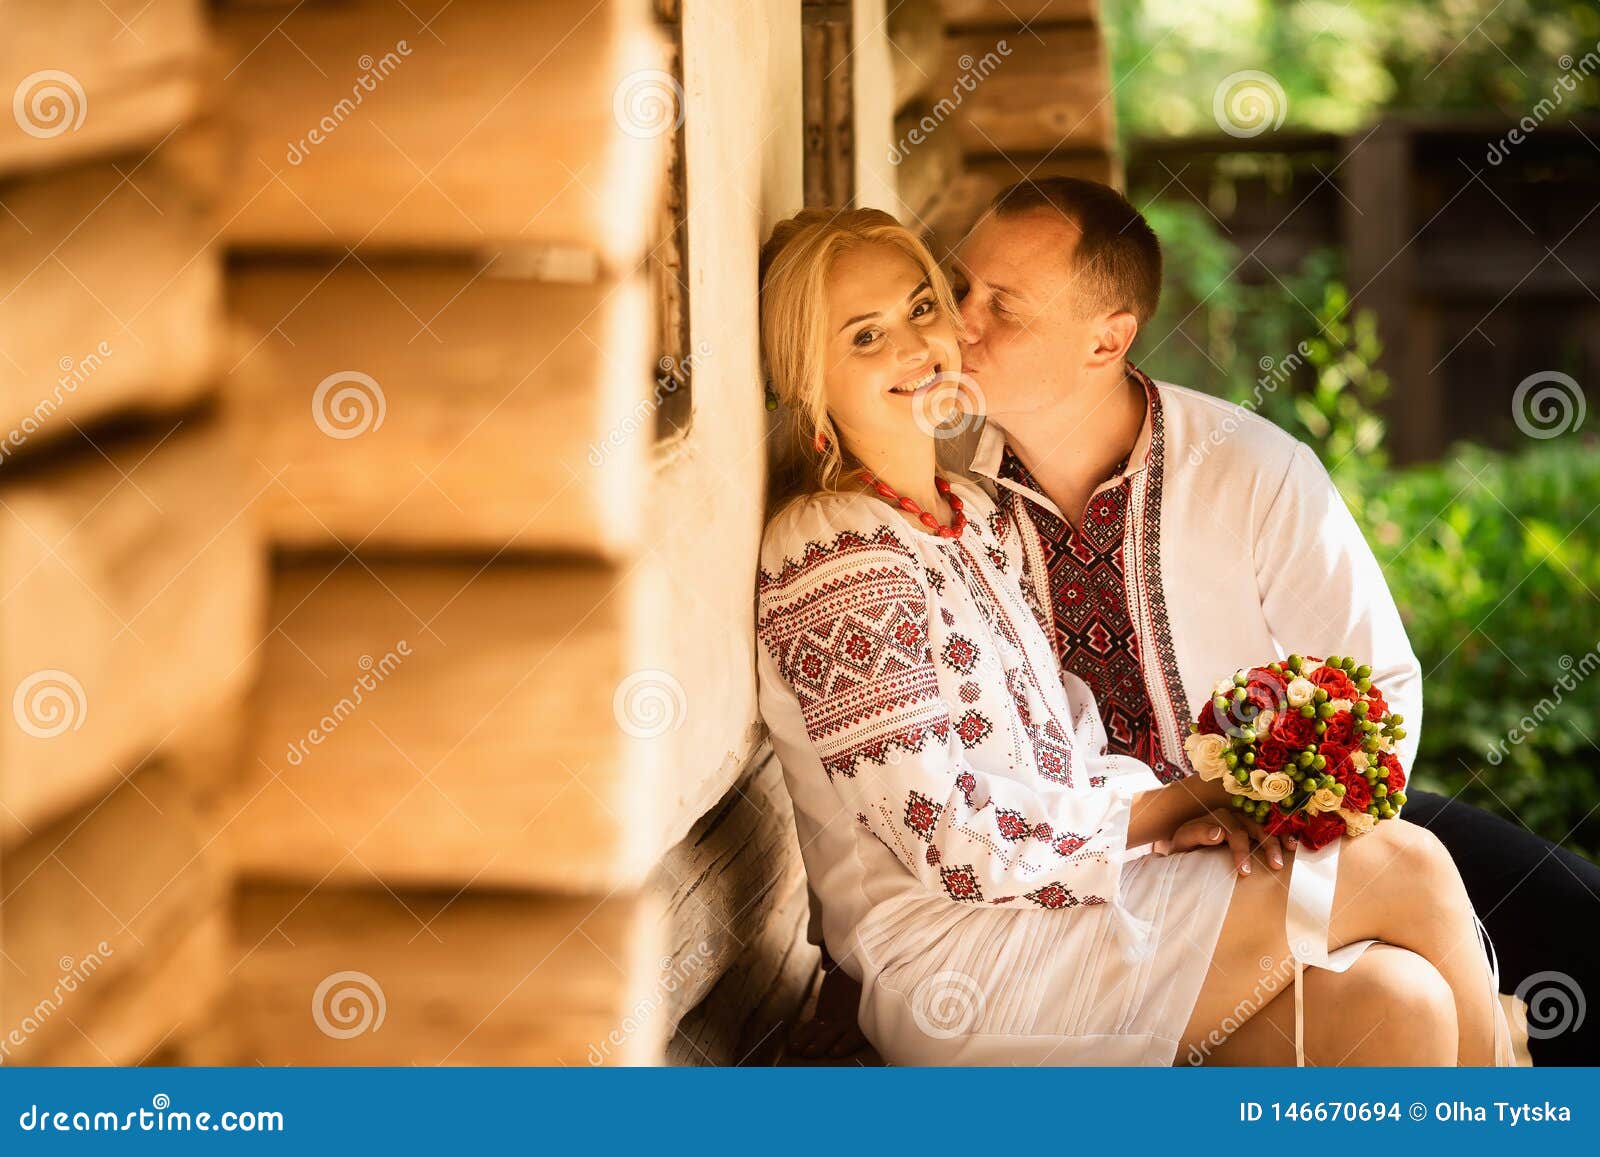 https://thumbs.dreamstime.com/z/young-couple-traditional-ukrainian-clothes-kissed-background-old-ukrainian-architecture-young-couple-traditional-146670694.jpg